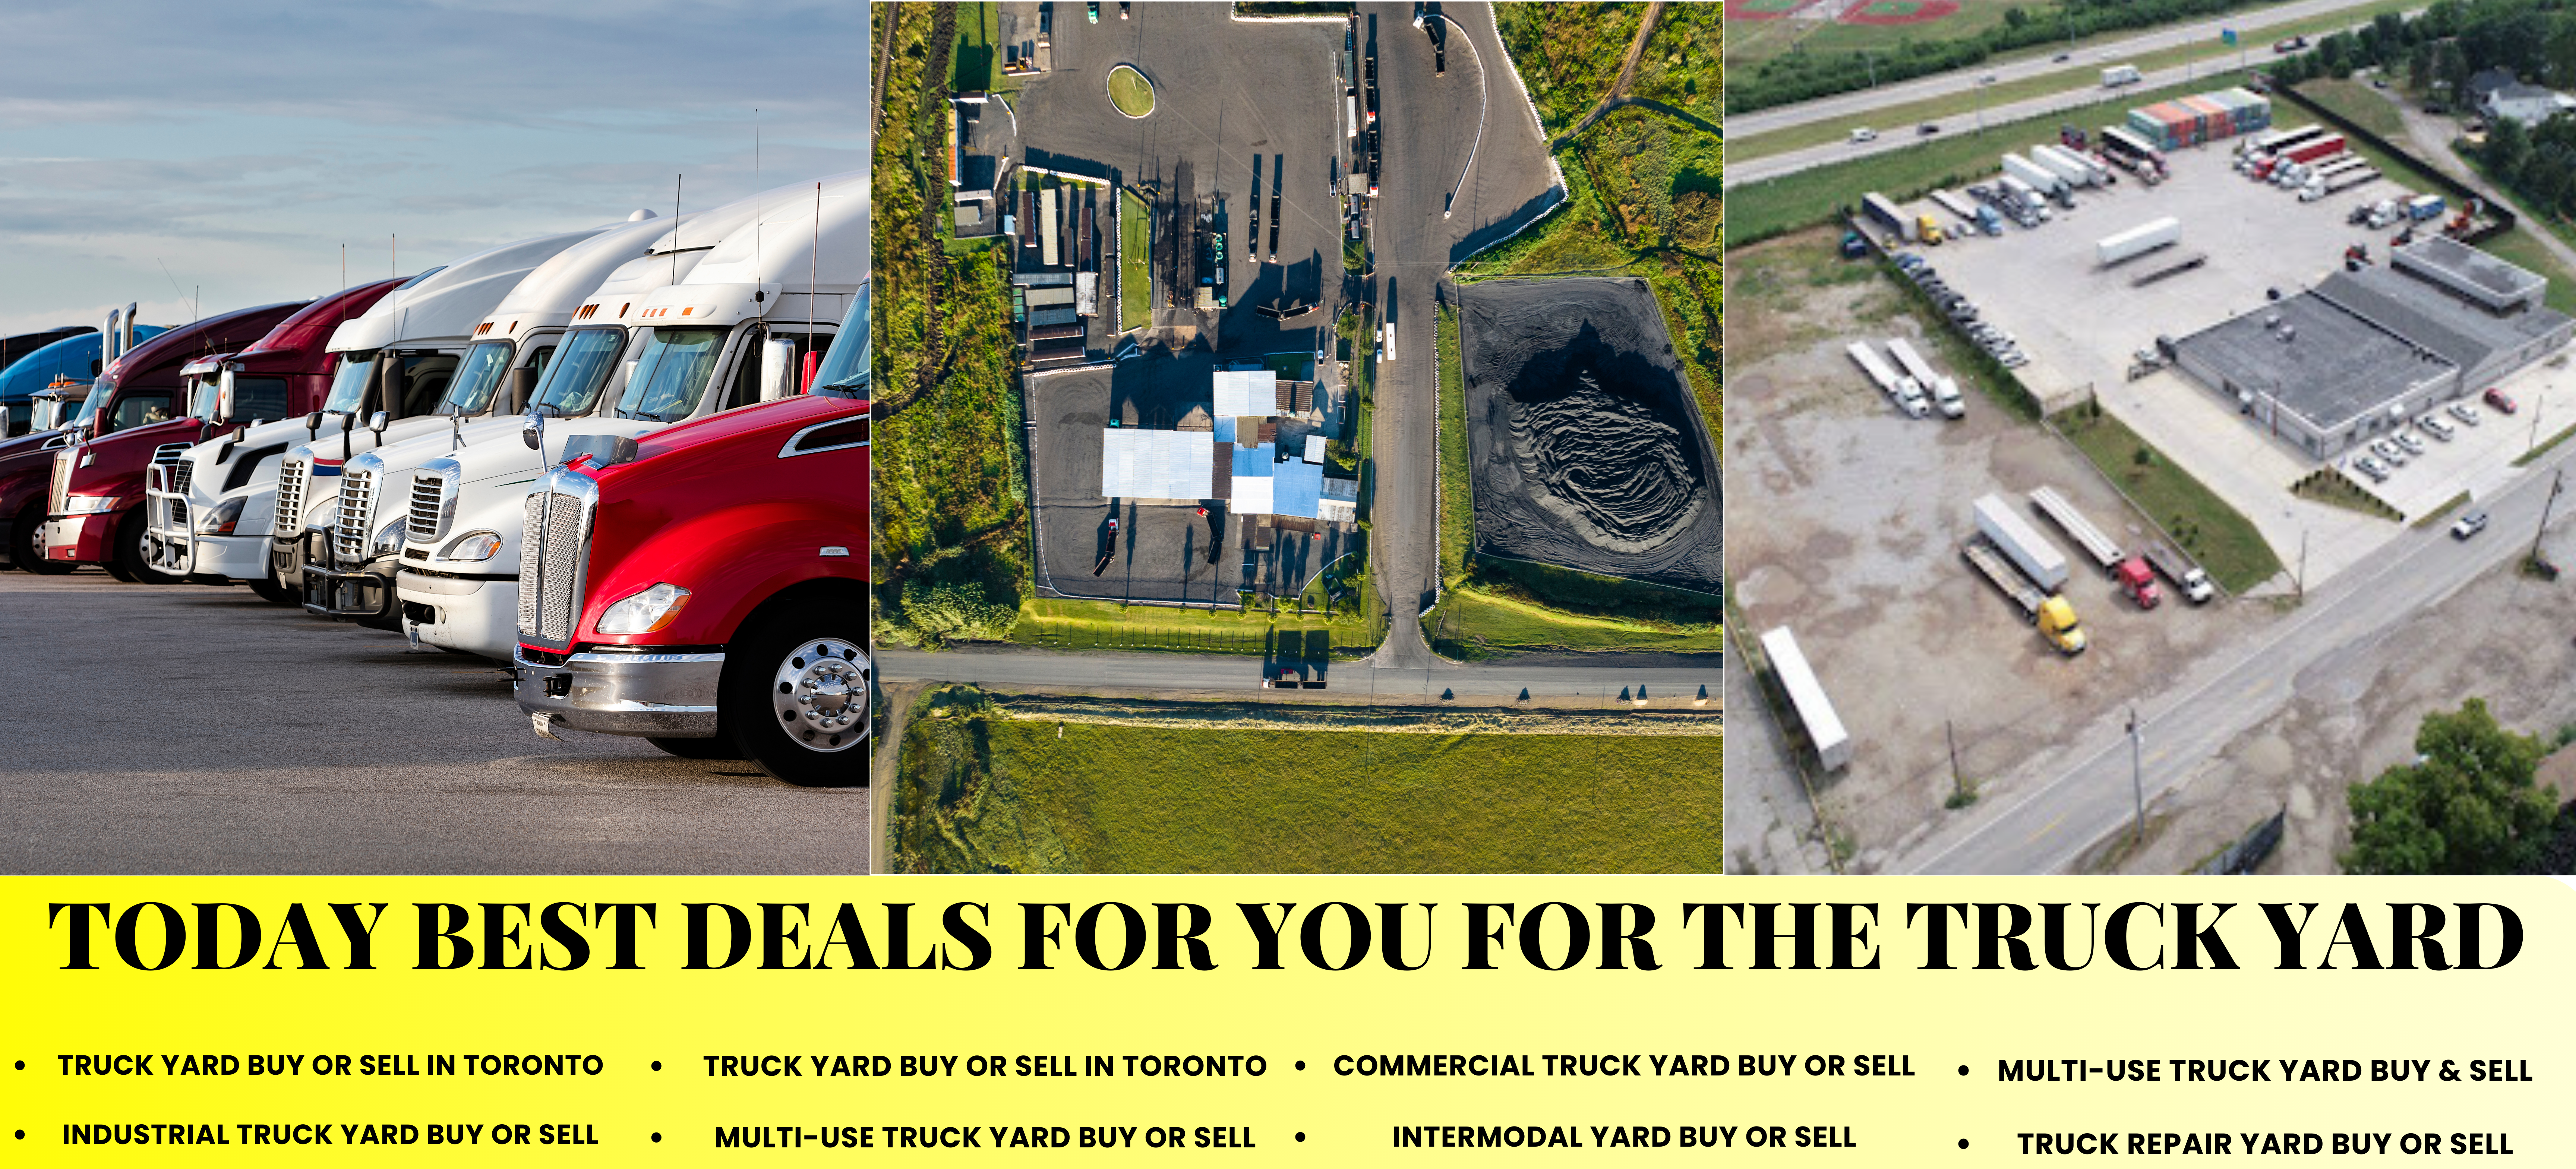 Today Best Deals For You For The Truck Yard in Brampton